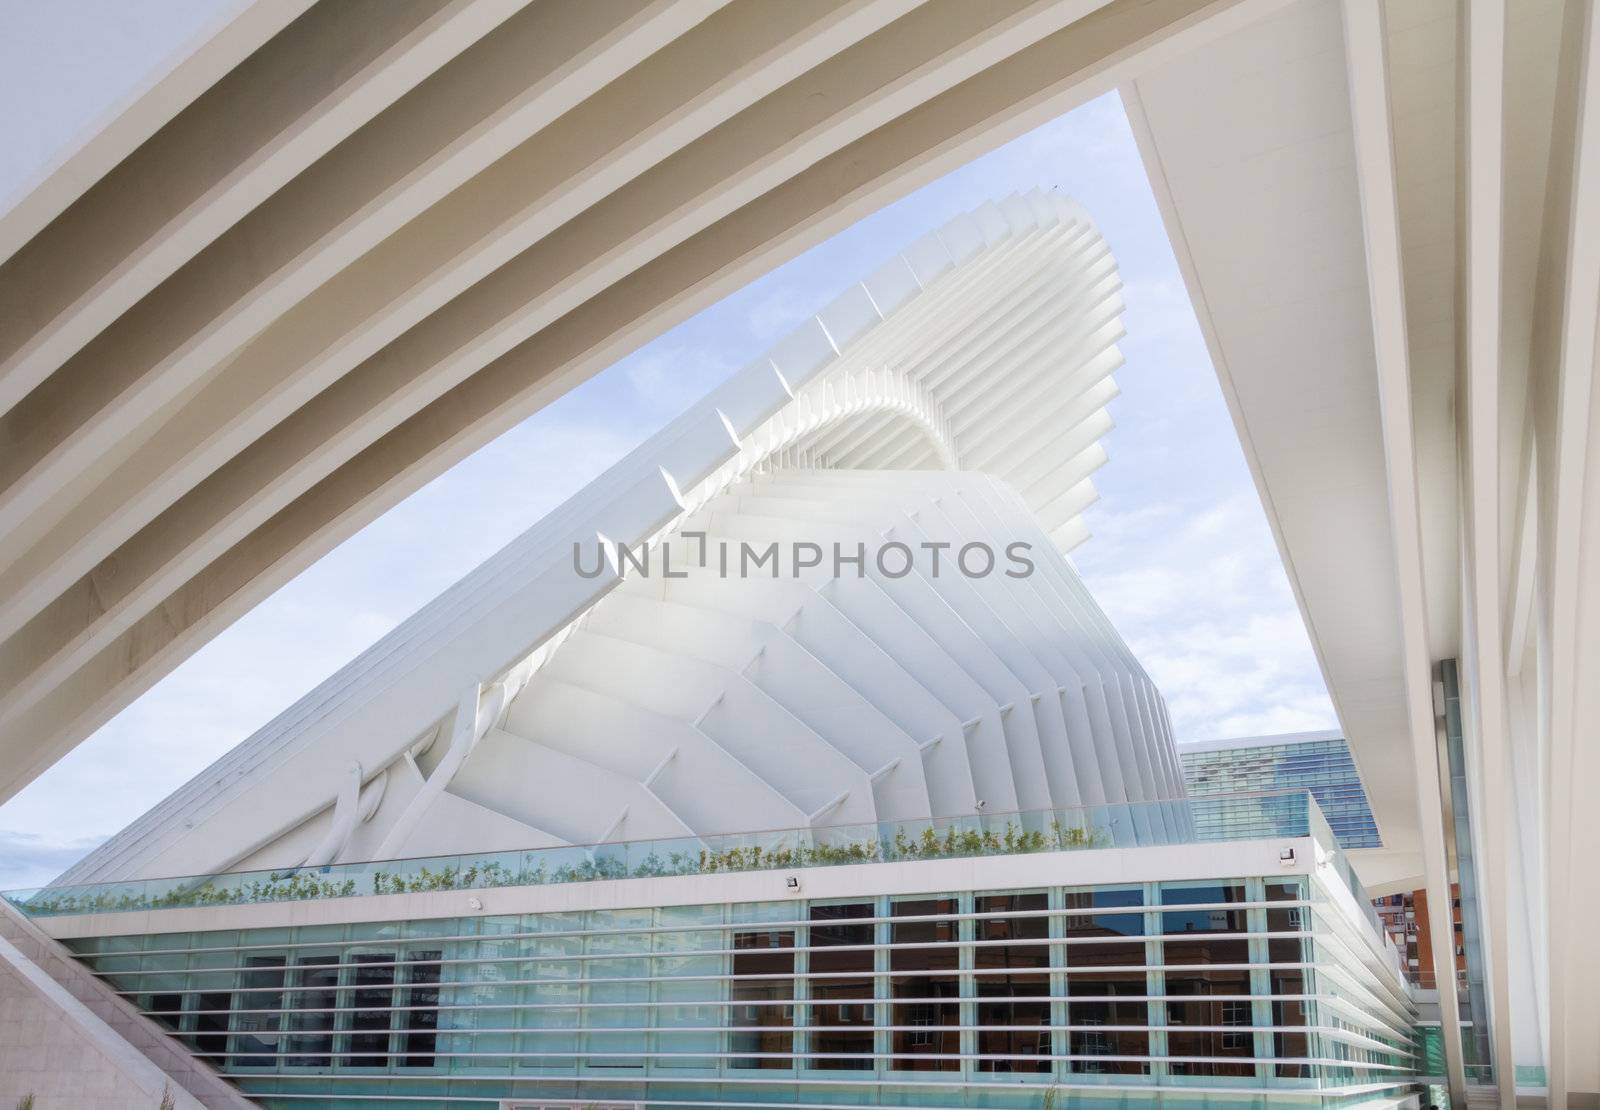 Conference and exhibition centre Ciudad de Oviedo in Asturias, Spain, on January 29, 2013. The modern center was designed by spanish architect Santiago Calatrava, and inagurated in May 2011